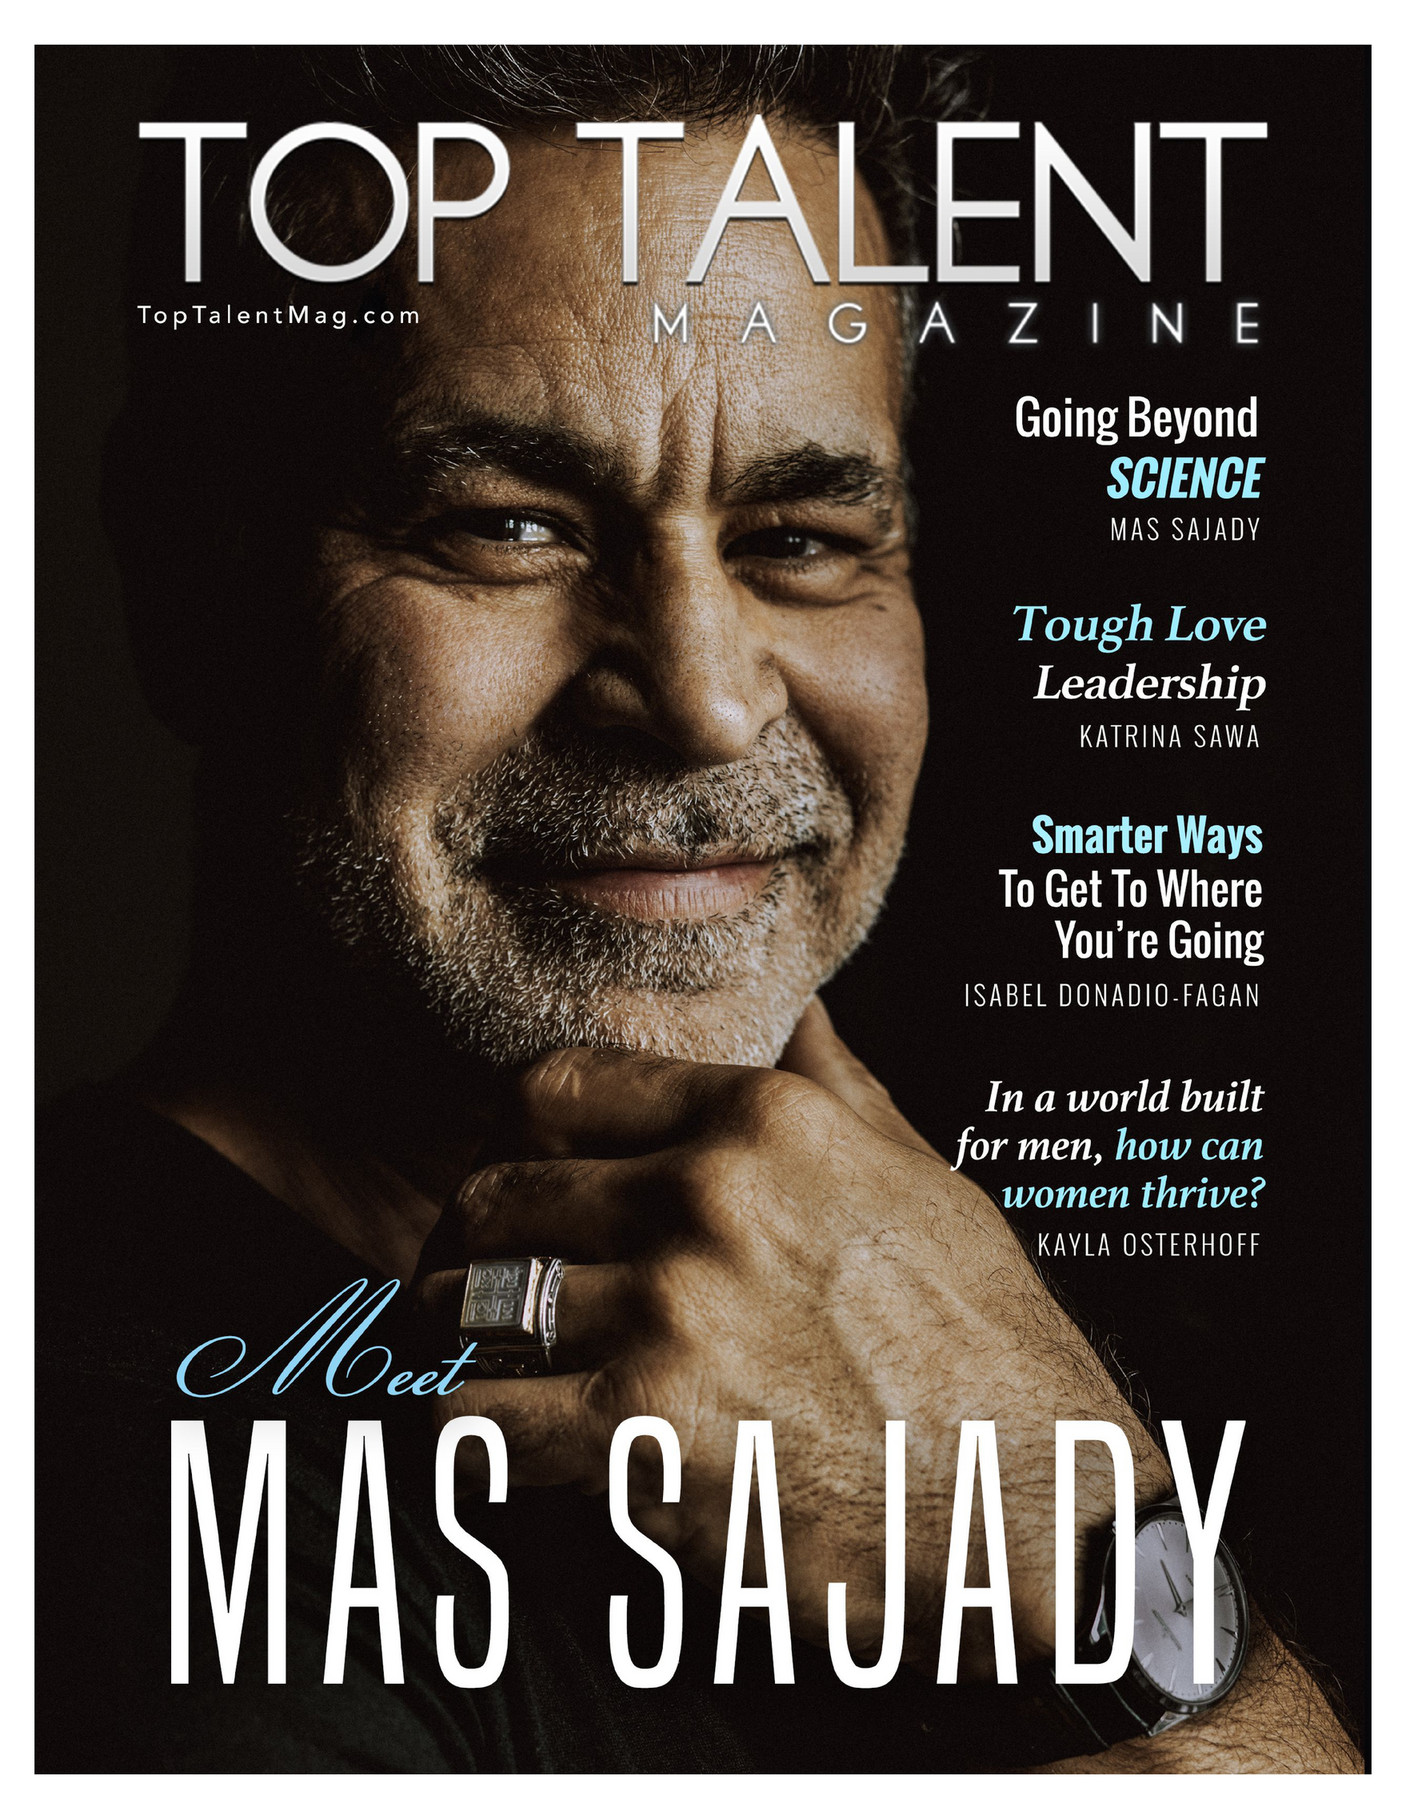 top-talent-magazine-featuring-mas-sajady-page-2-3